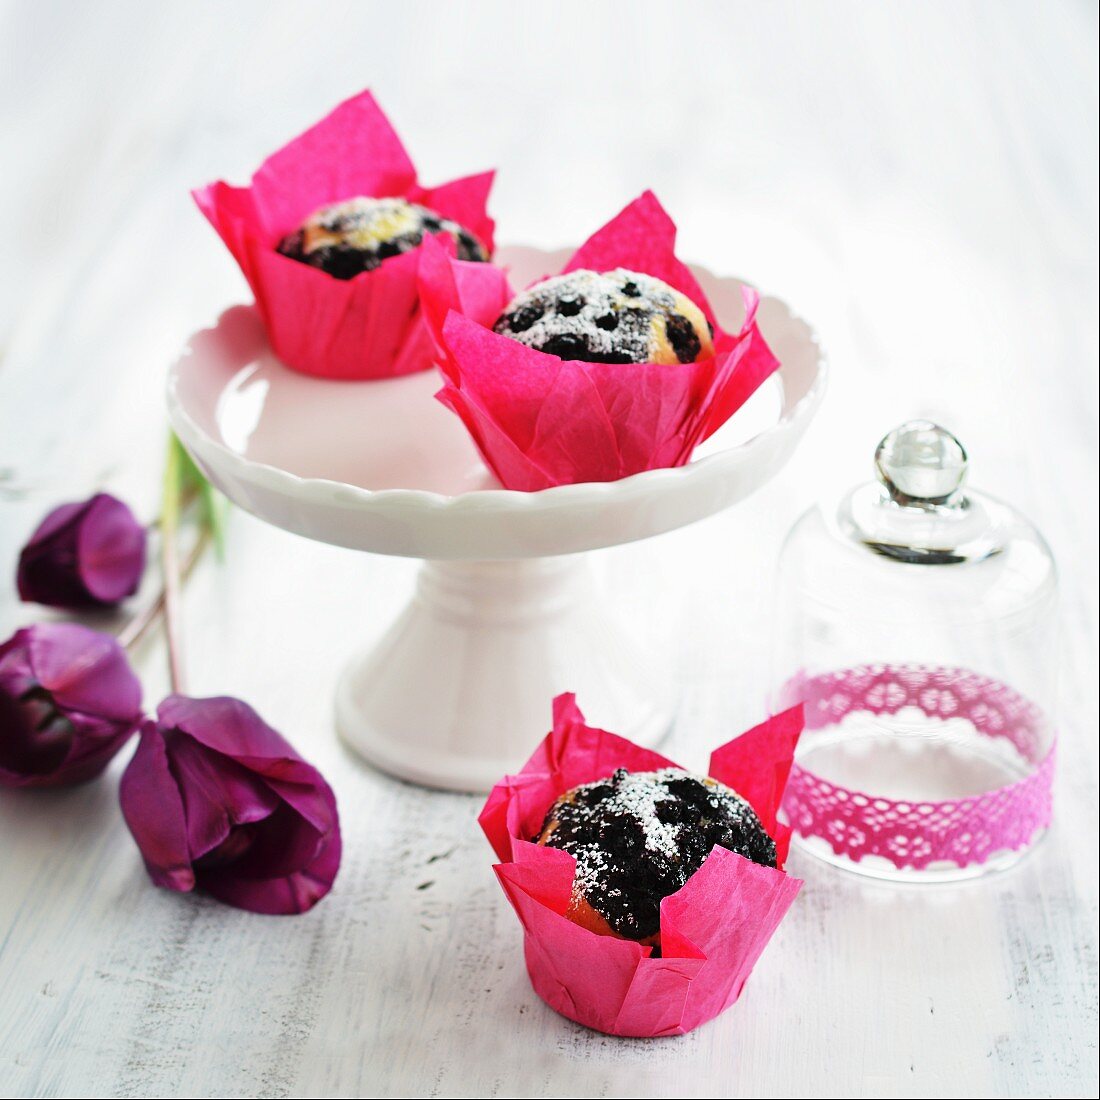 Blueberry muffins on a cake stand and next to a glass cloche